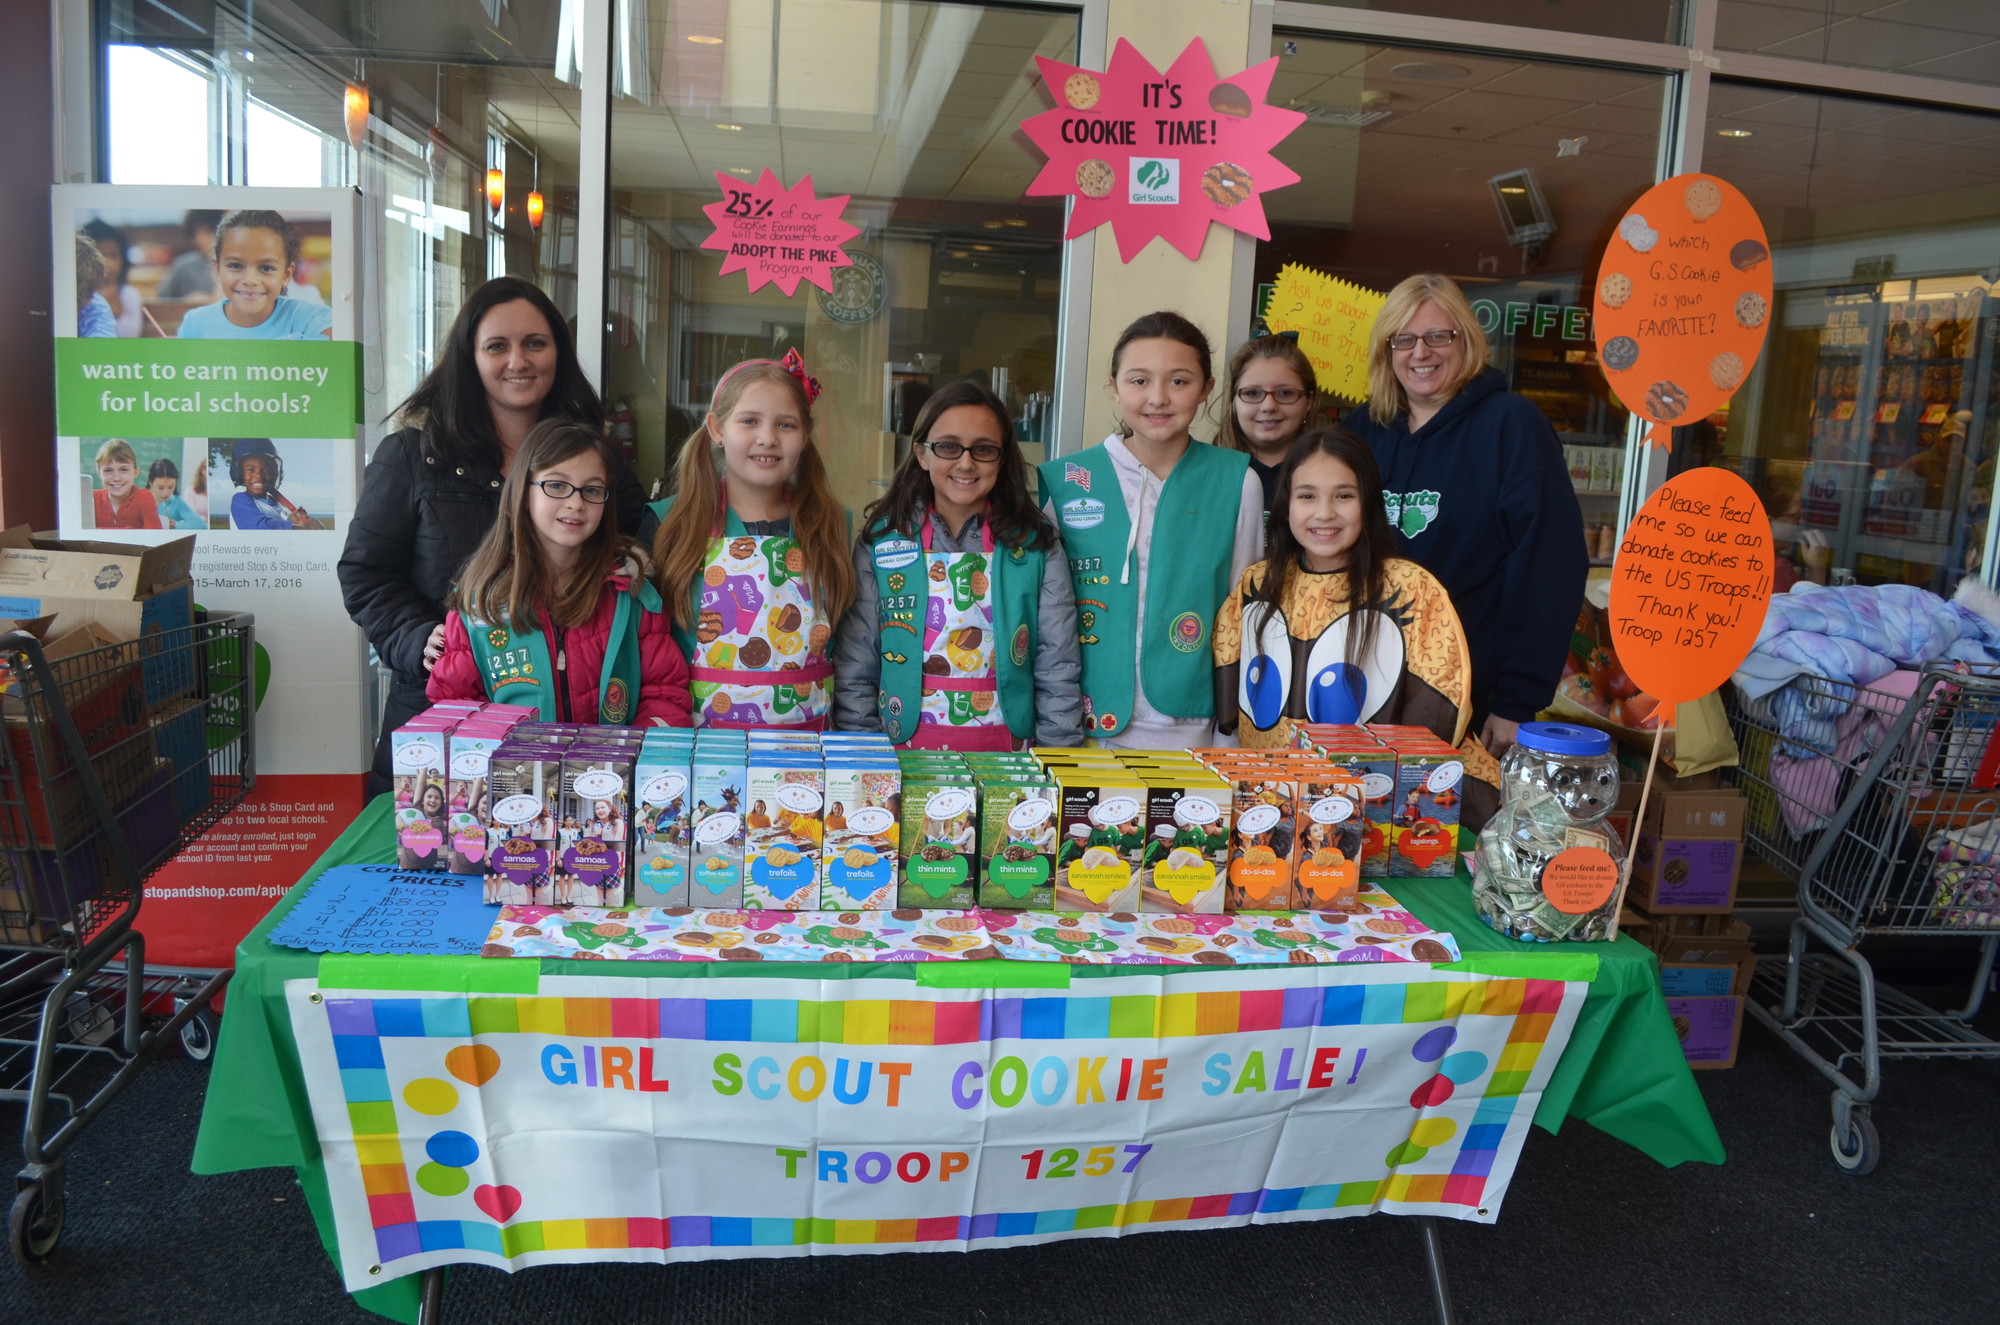 Christy McKenna, far left, helped scouts, from left Caroline Dilman, Marley Hunt, Emily McKenna, Brianna Suarez Oubina, Kristina Mazarese, Cassandra O’Connell, raise money for the ‘Adopt the Pike’ program with co leader Lisa Mazarese.